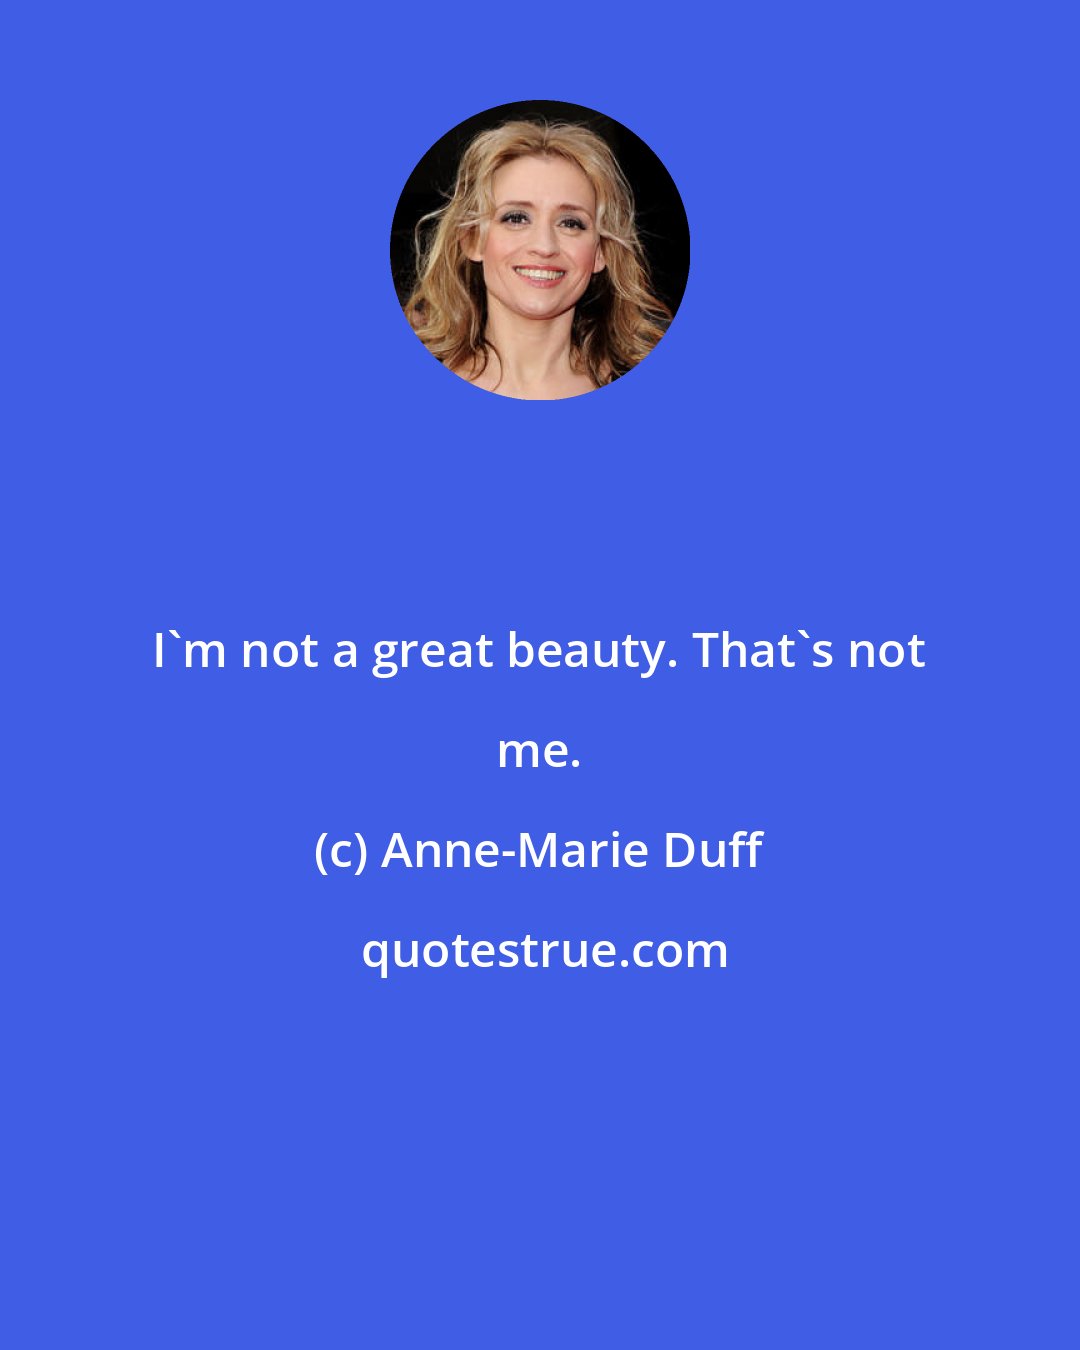 Anne-Marie Duff: I'm not a great beauty. That's not me.